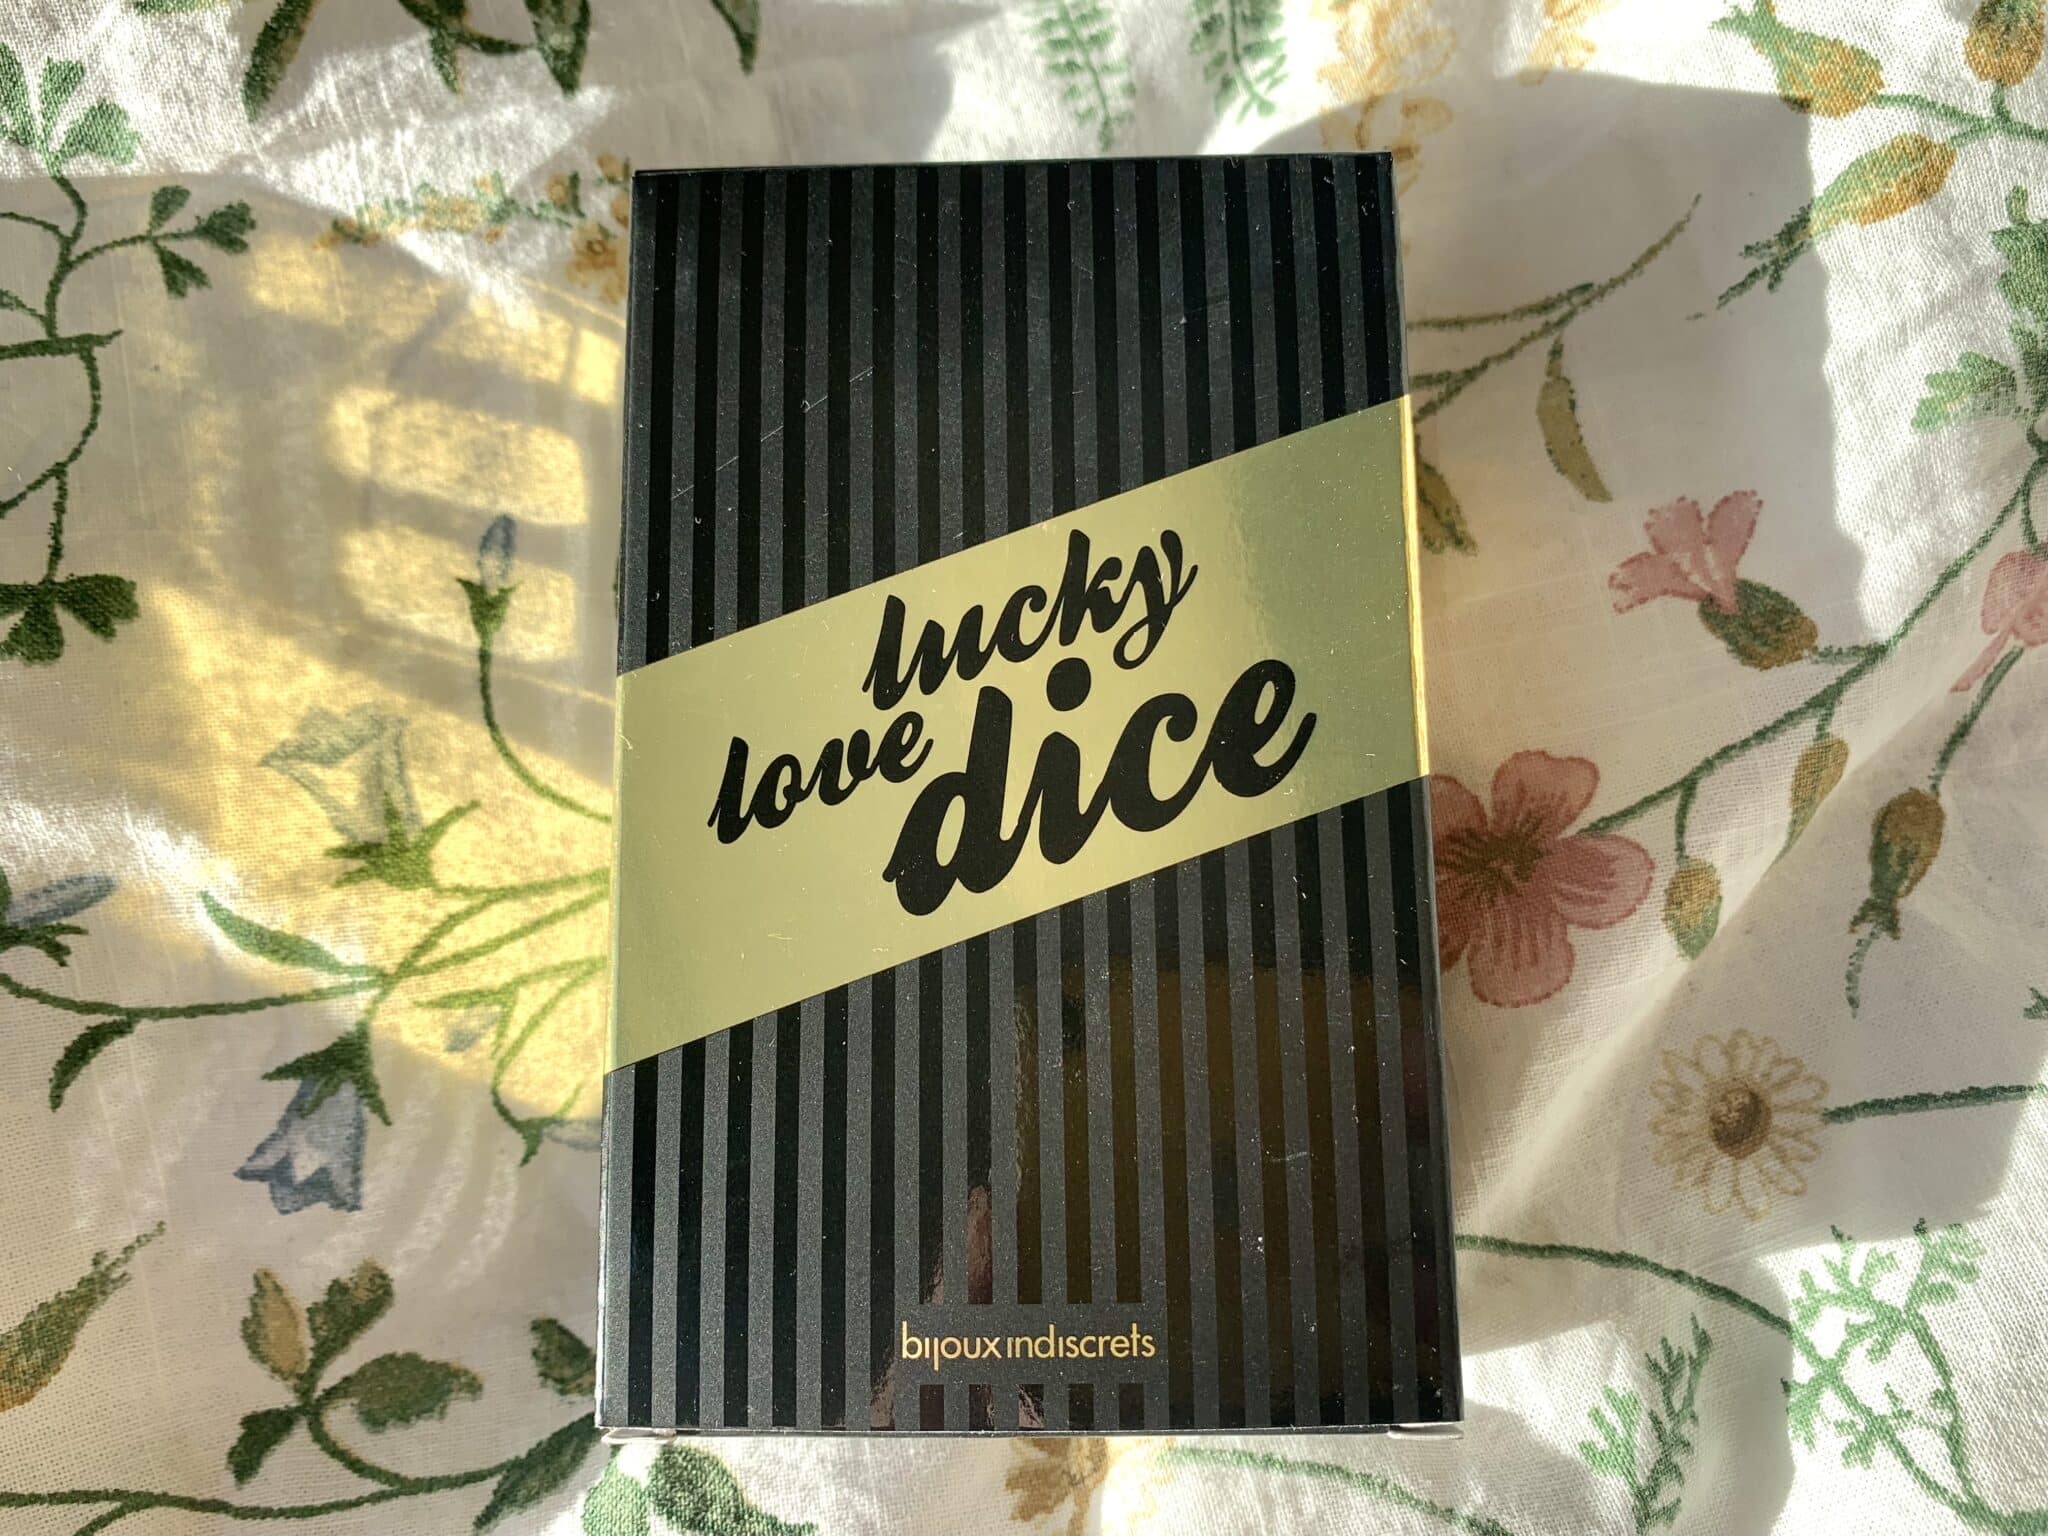 Bijoux Indiscrets Lucky Love Dice The Art of Presentation: The Bijoux Indiscrets Lucky Love Dice’s Packaging